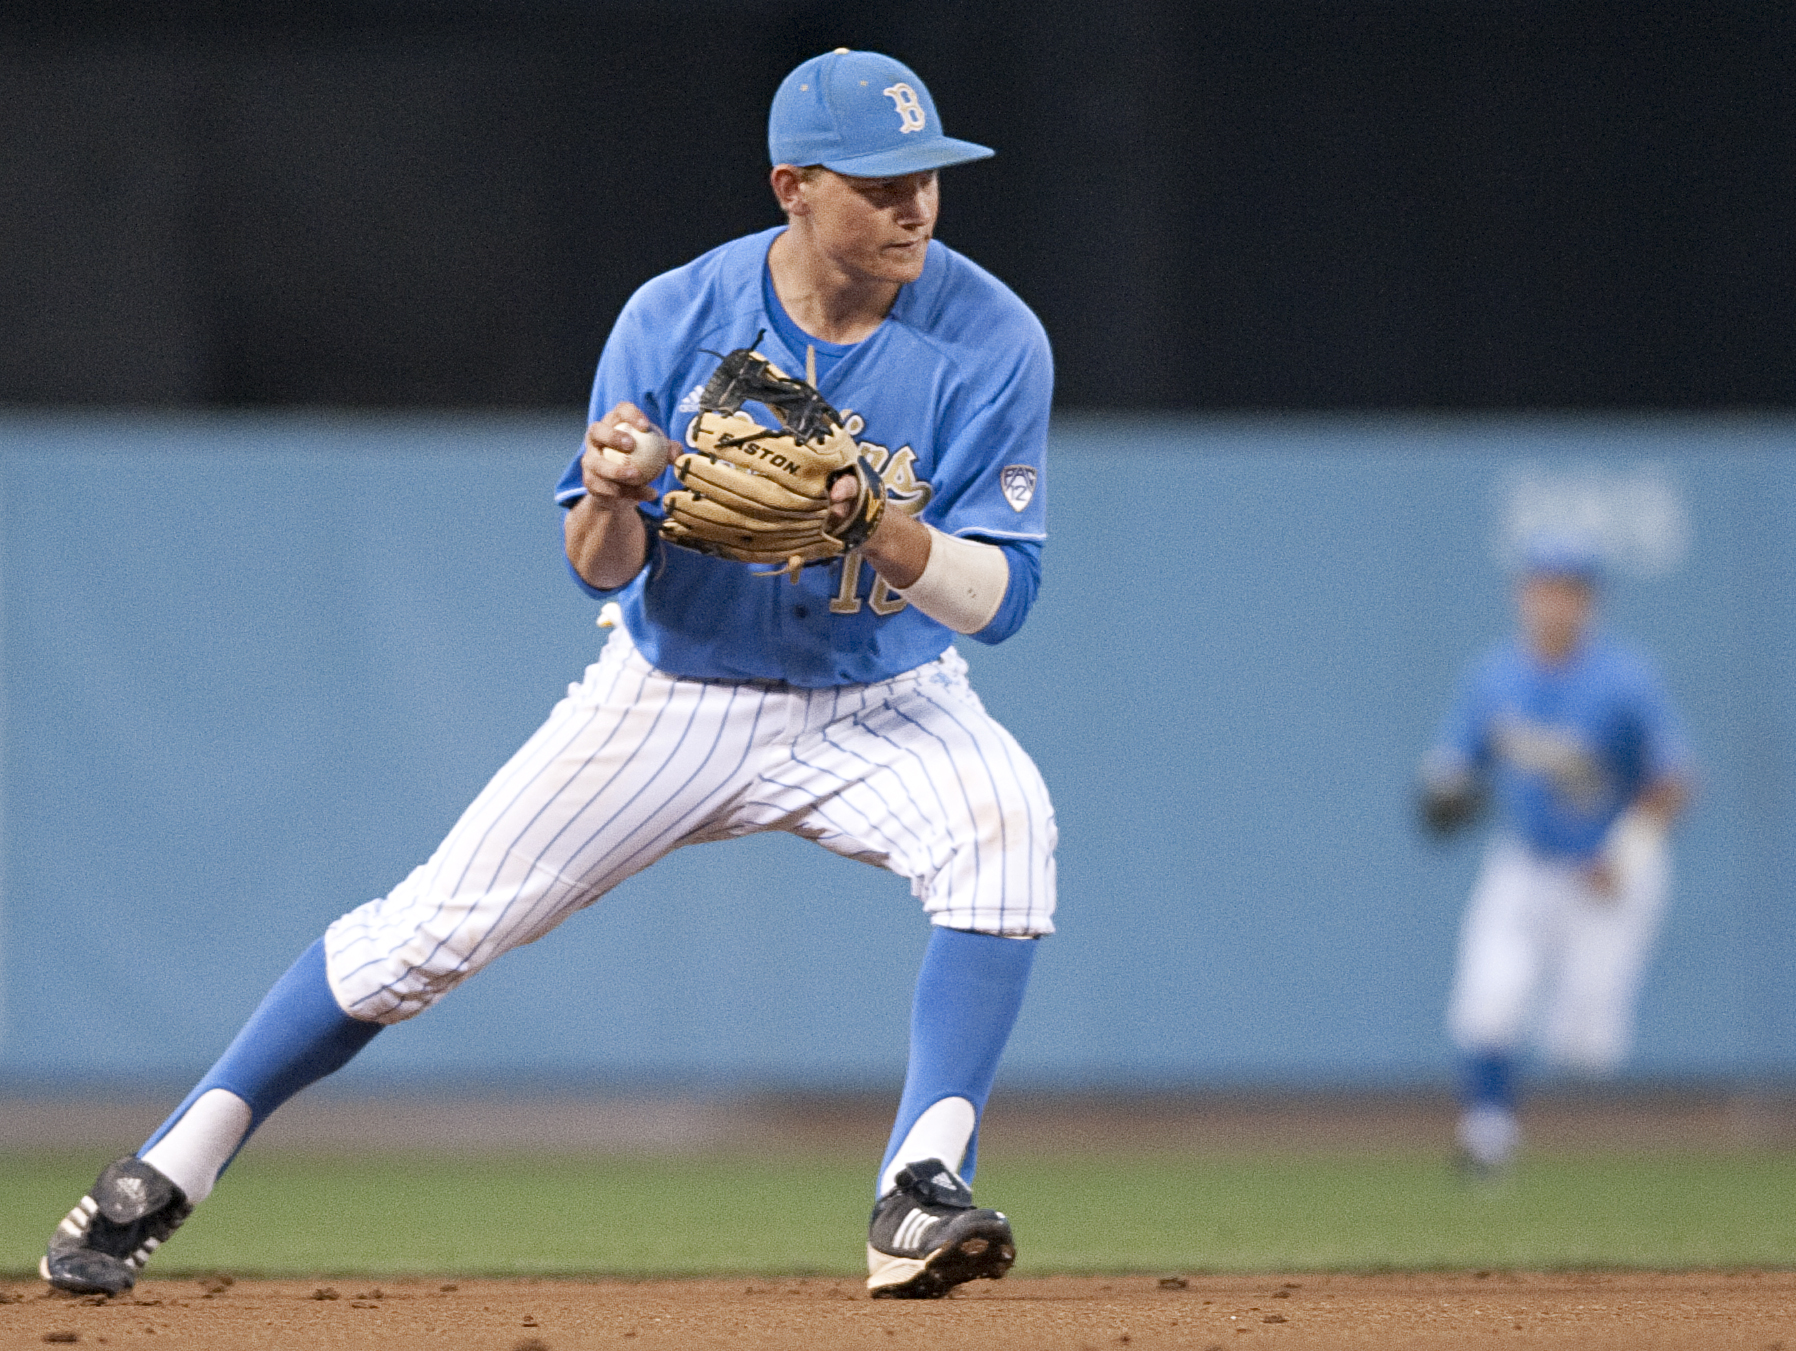 UCLA baseball looks for steady, consistent play against Stanford